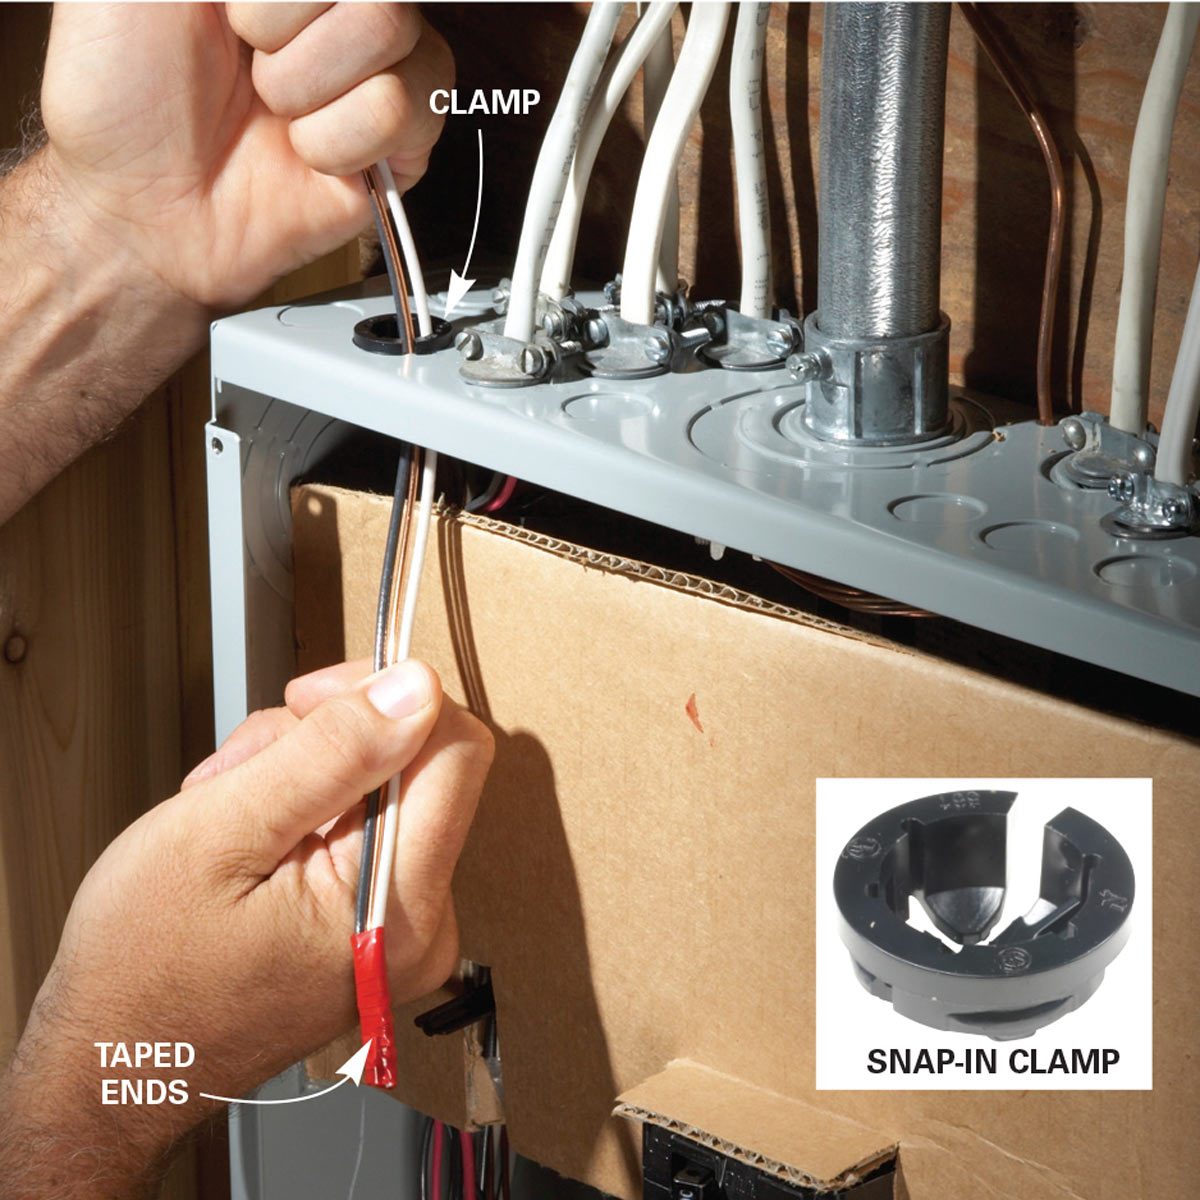 Breaker Box Safety How to Connect a New Circuit (DIY) Family Handyman